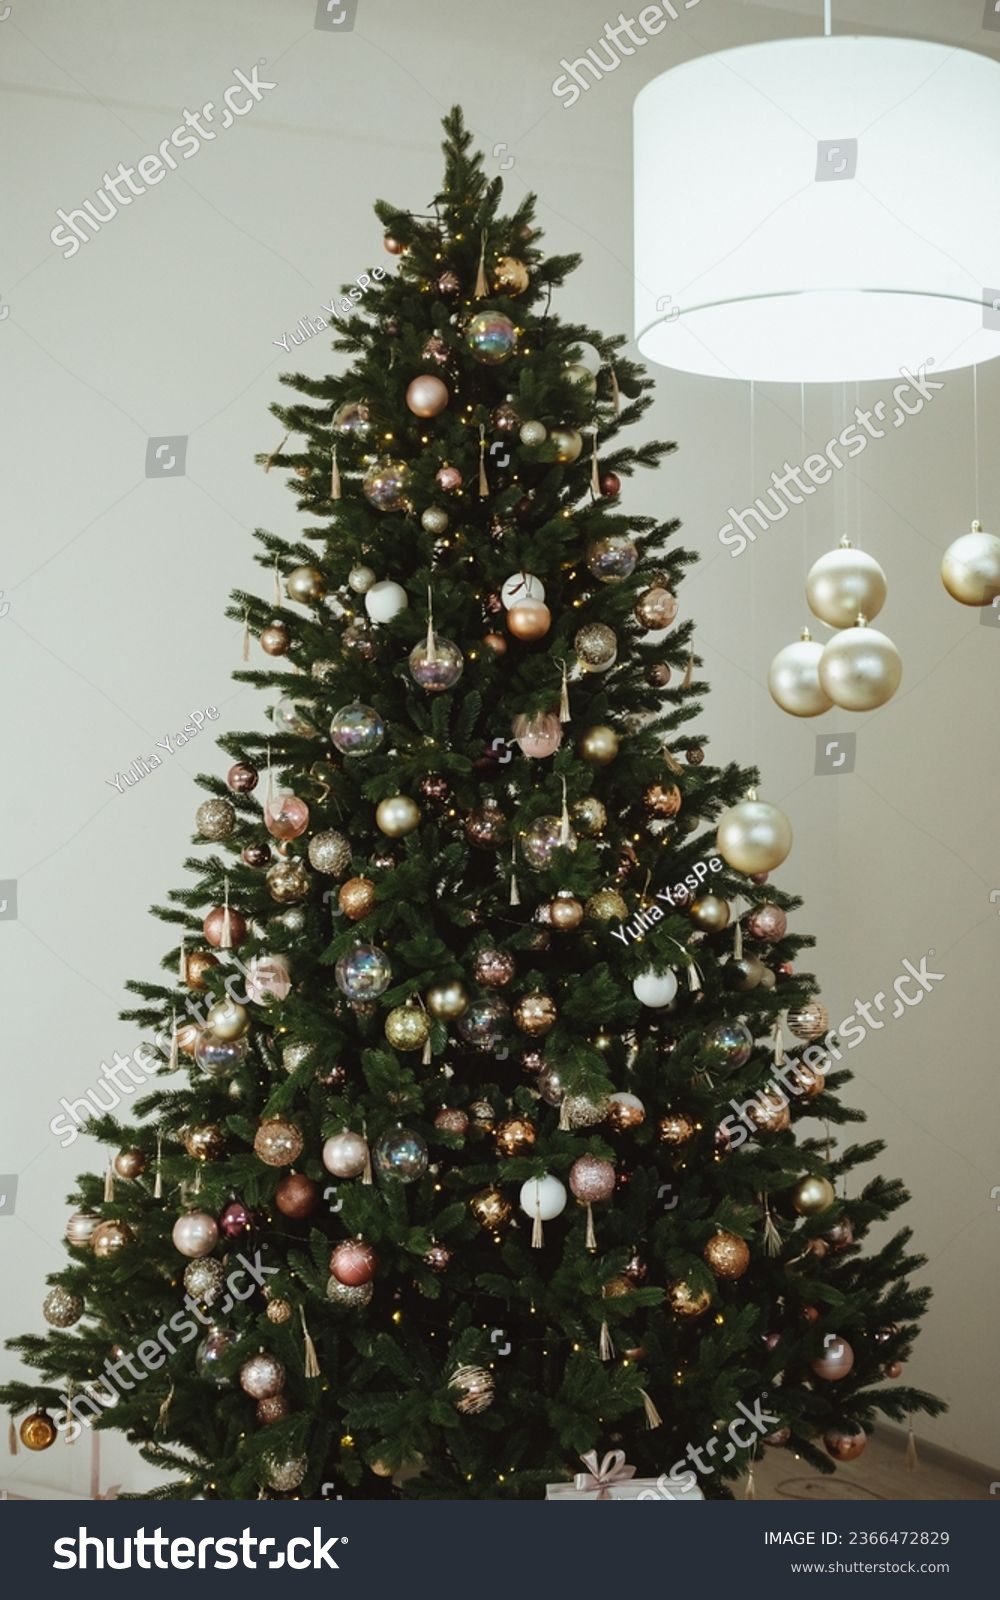 Big beautiful christmas tree decorated with beautiful shiny baubles and many different presents on wooden floor. White wall background with copy space. #2366472829